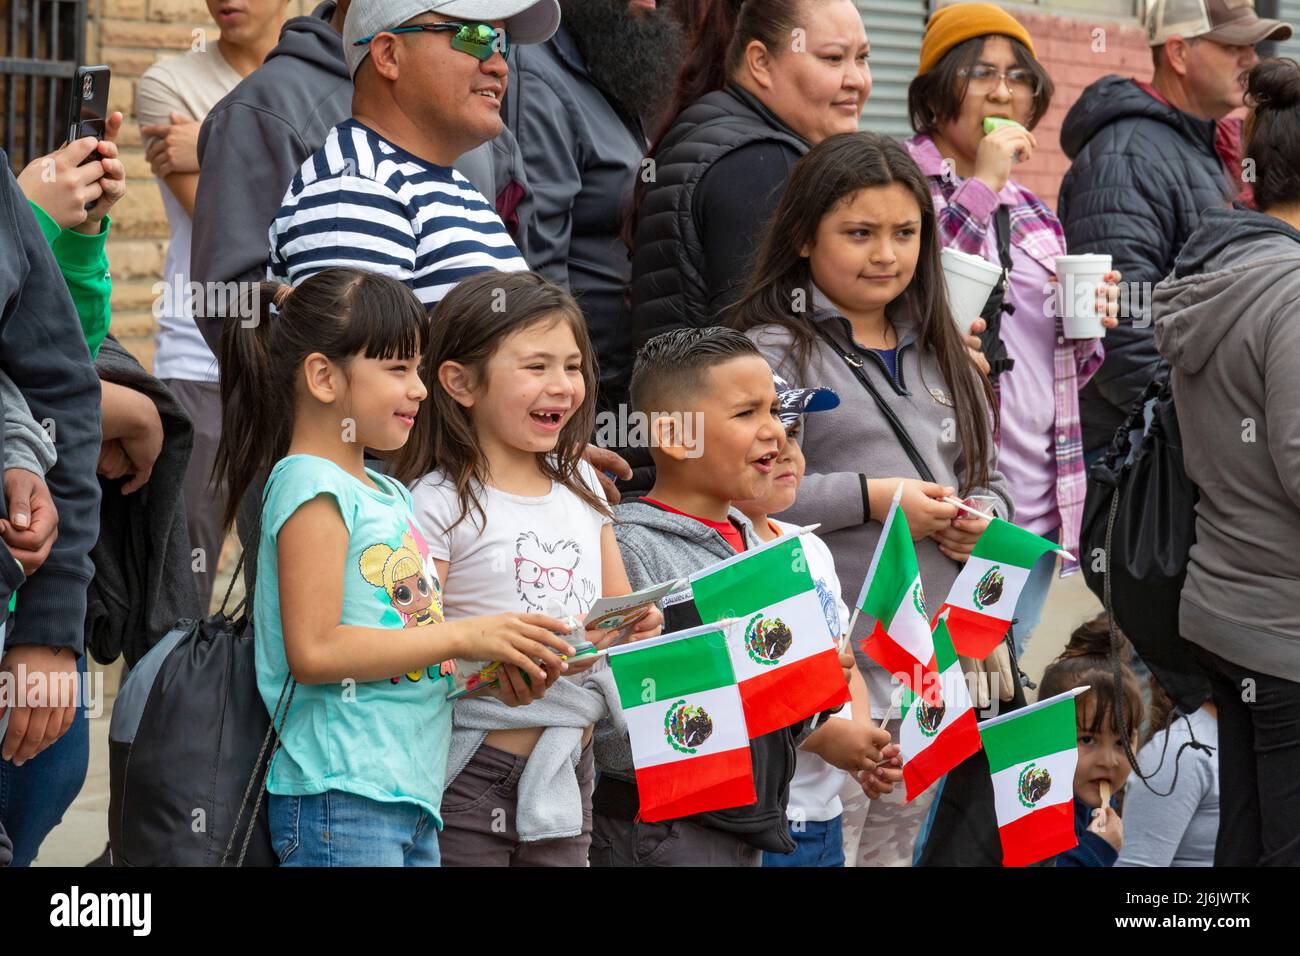 Detroit, Michigan USA - 1 May 2022 - Children hold Mexican flags as they watch the Cinco de Mayo parade in Detroit's Mexican-American neighborhood. Thousands watched the annual parade, which returned in 2022 after a two-year hiatus due to the pandemic. Cinco de Mayo celebrates a Mexican victory over the French on May 5, 1862. Credit: Jim West/Alamy Live News Stock Photo